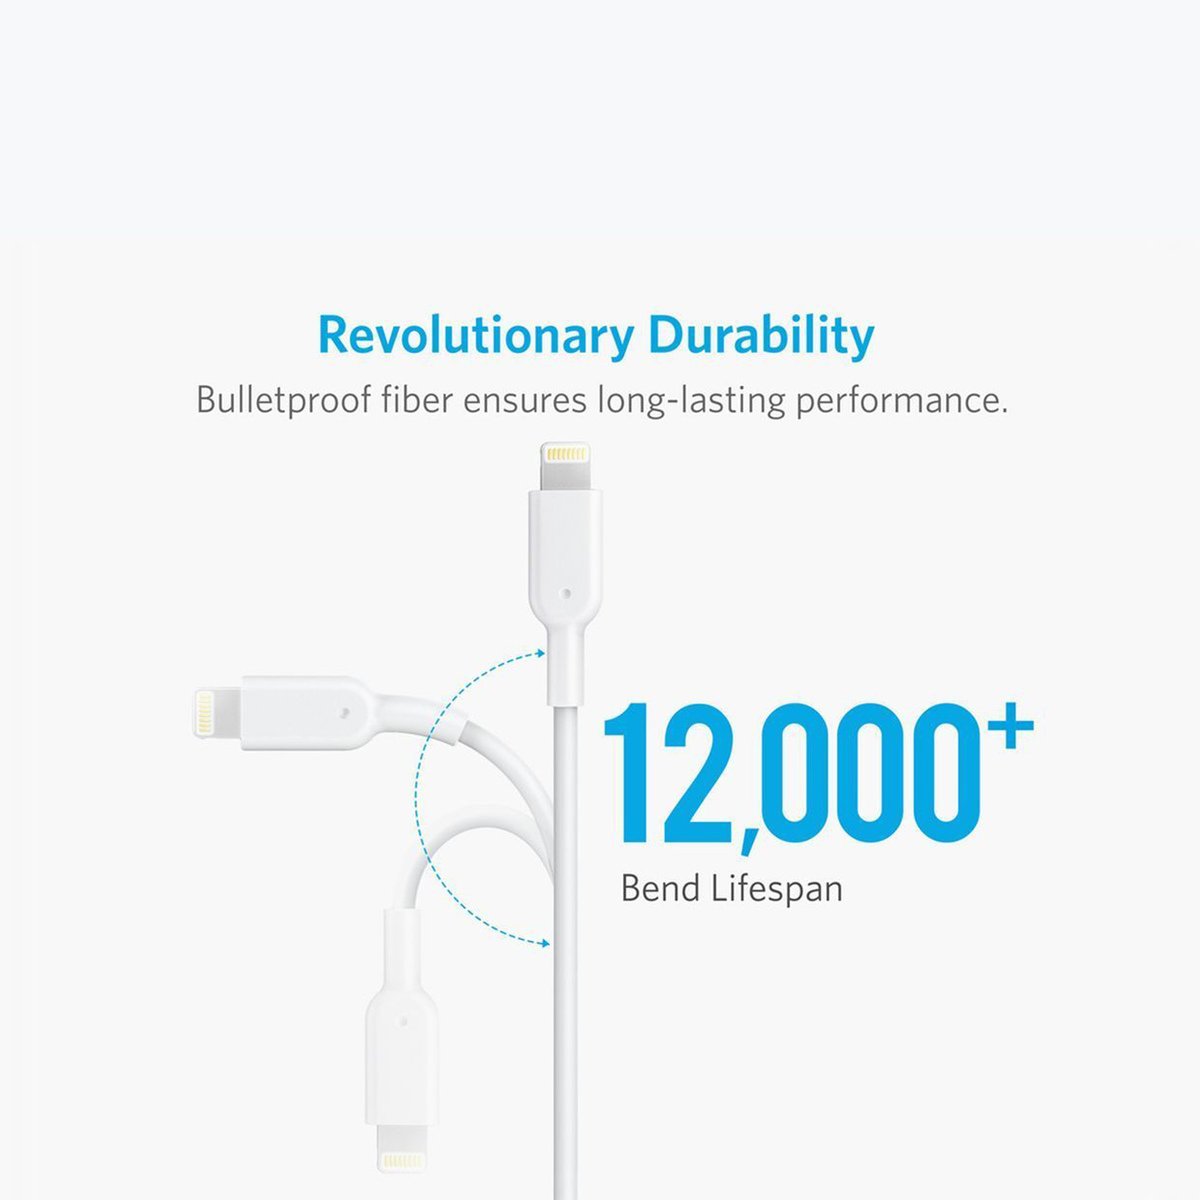 Anker PowerDrive 2 Elite with Lightning Cable A2214H21 White